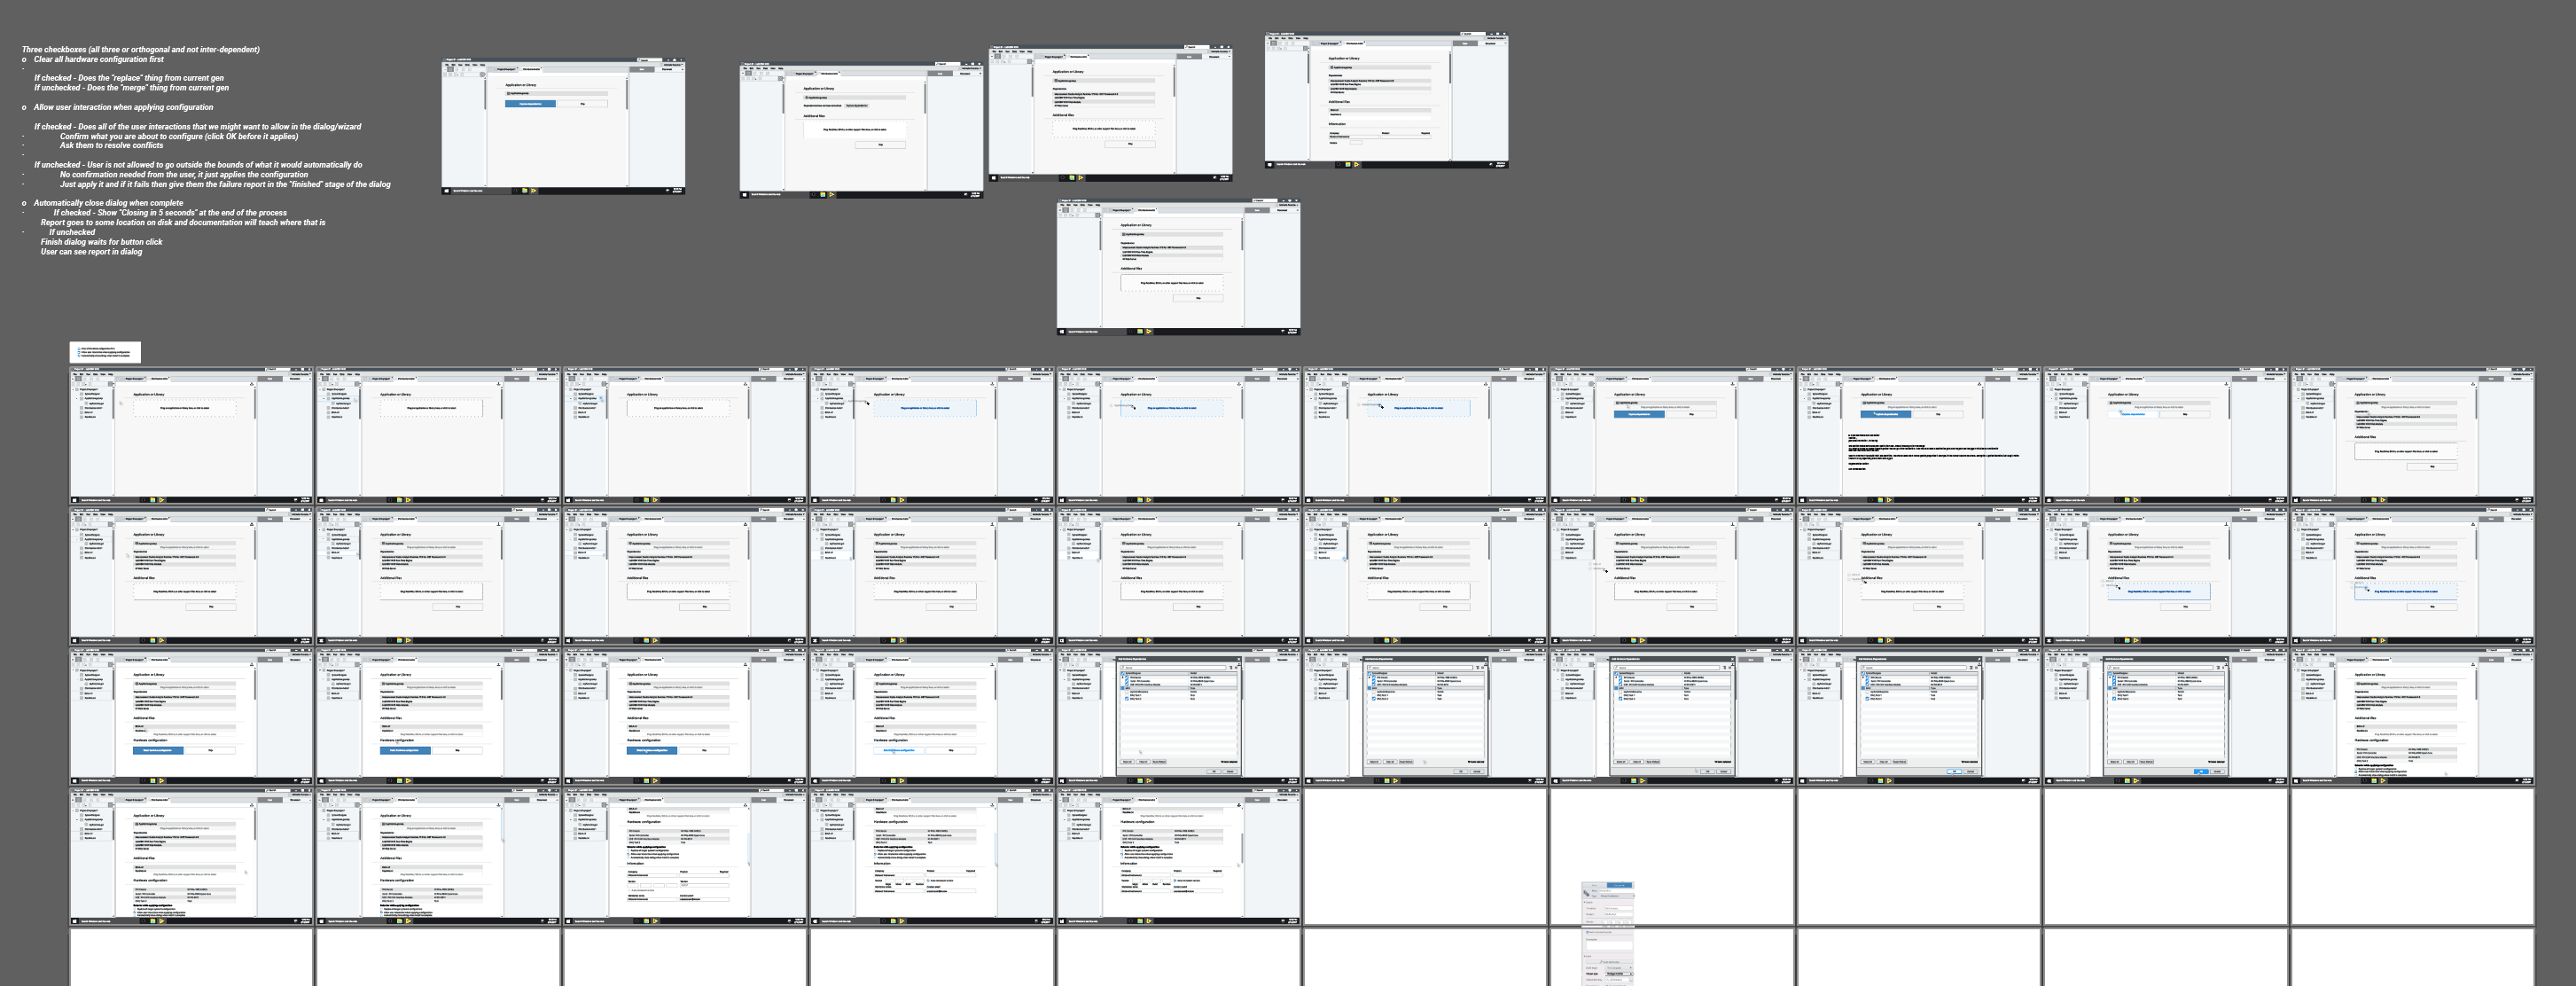 a screenshot of a grid of roughly 40 artboards in adobe illustrator with notes and low fidelity wireframes on each artboard